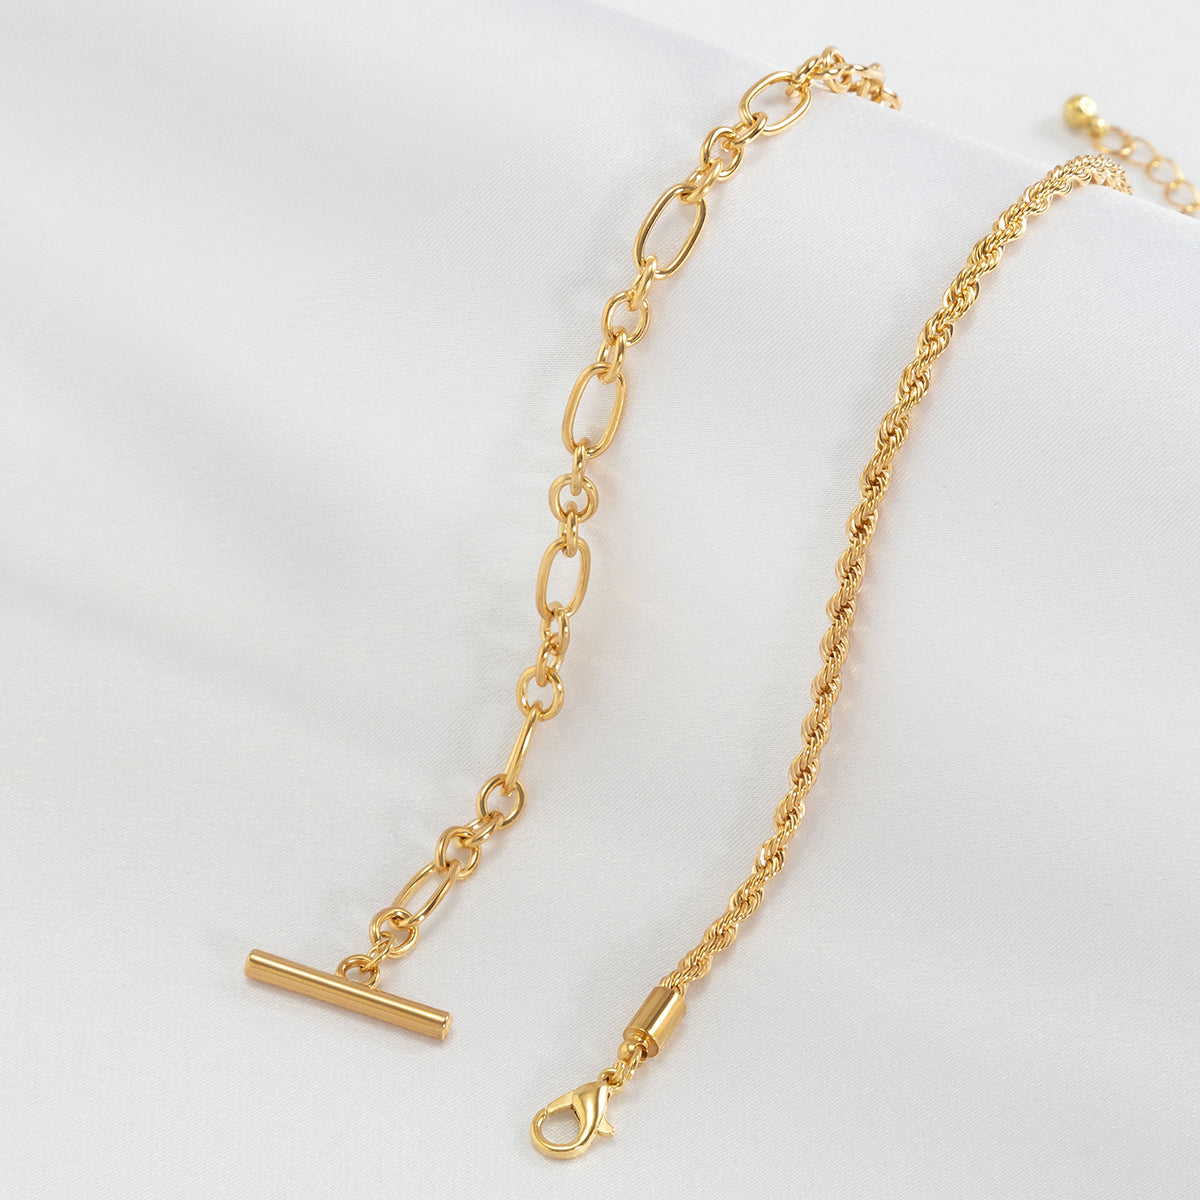 18K Gold-Plated Toggle Rope Chain Bracelet Set